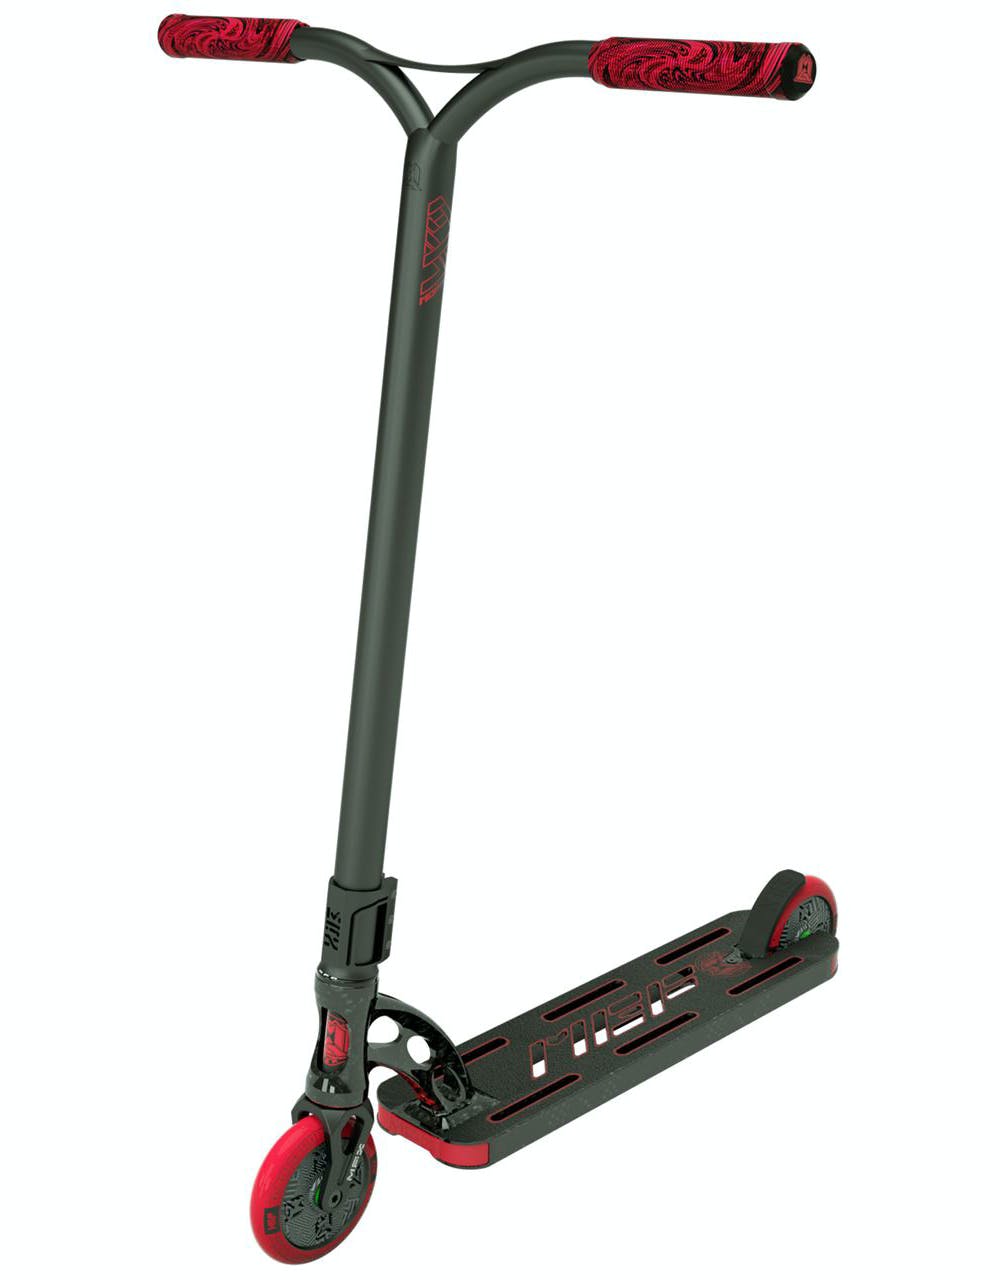 MGP VX 9 Extreme 4.5" Complete Scooter - Evol